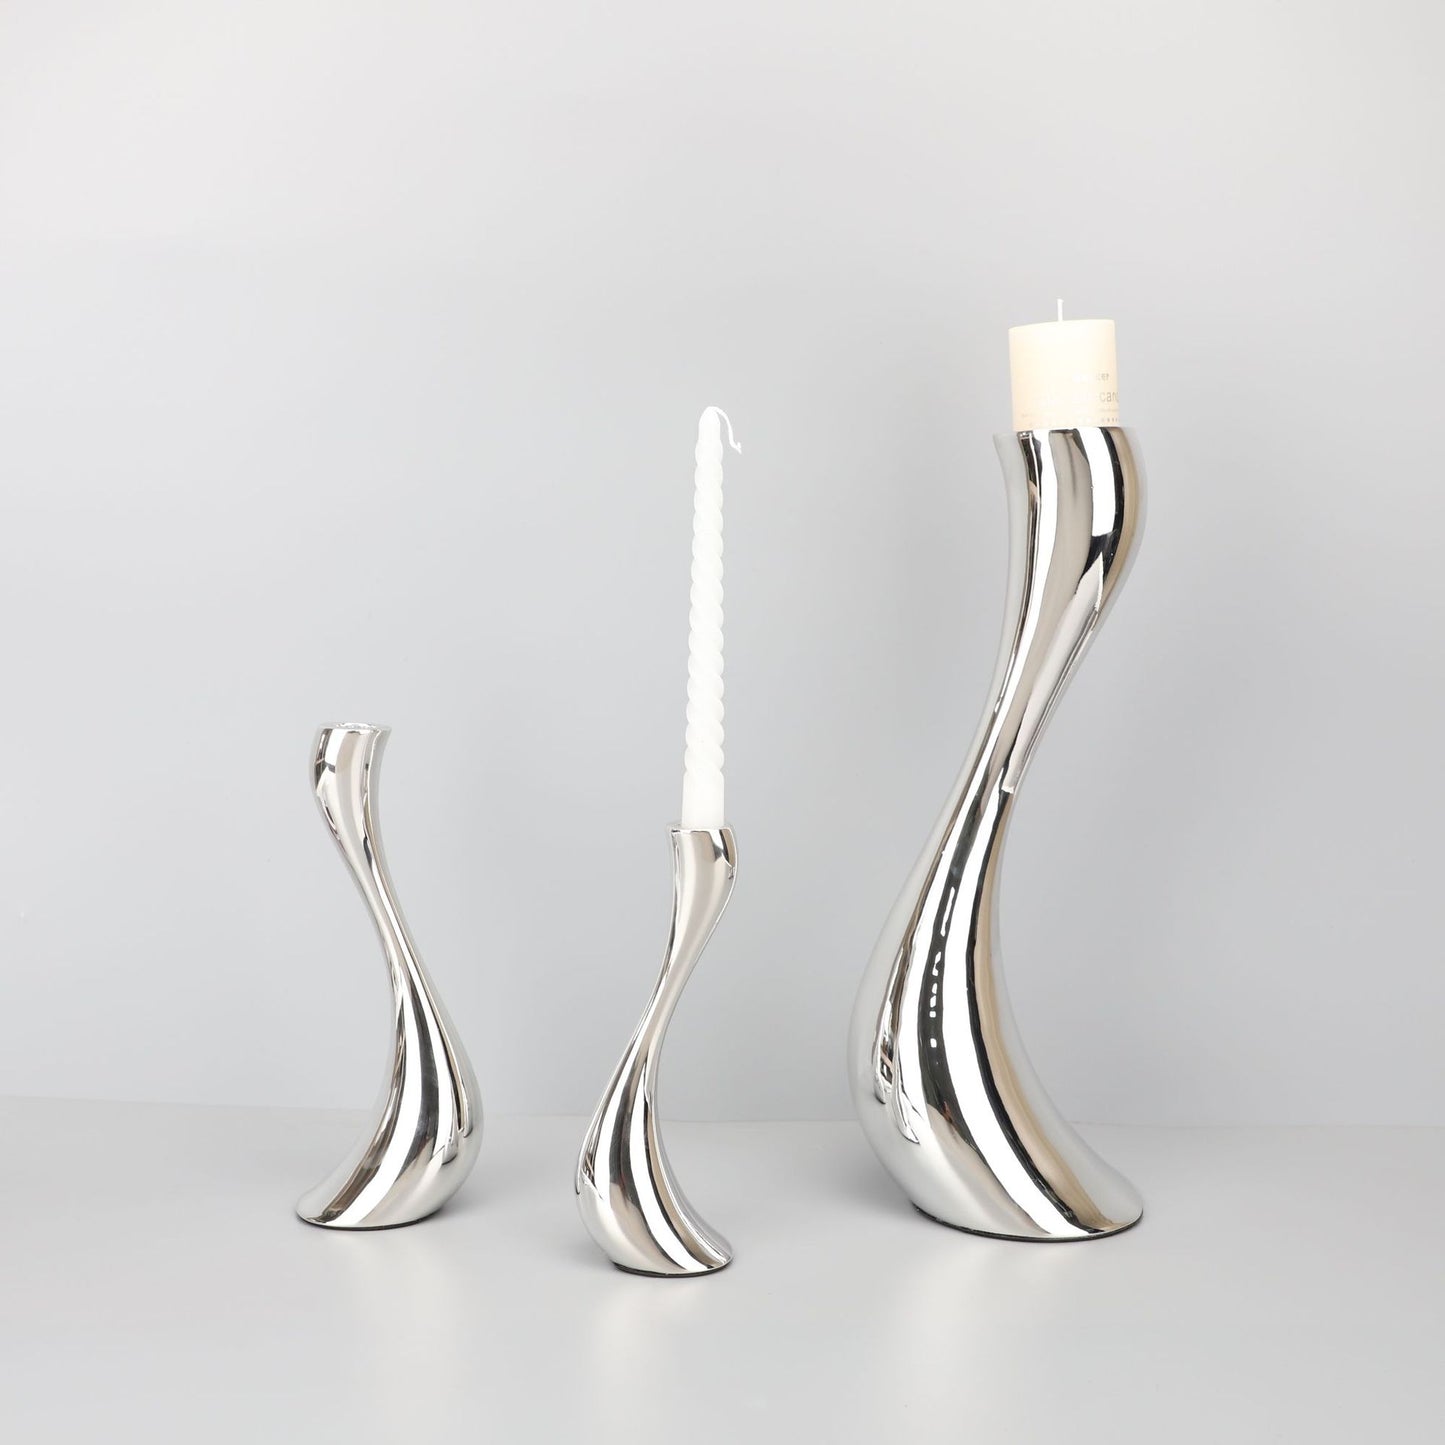 S-Shaped Resin Candle Holders: Modern Silver Decor for Hotels, Homes, and Living Rooms (Large: 5.5x5.1x15 inches, Medium: 3.1x3.7x9.4 inches, Small: 2.6x3.1x7.9 inches)，Set of 3